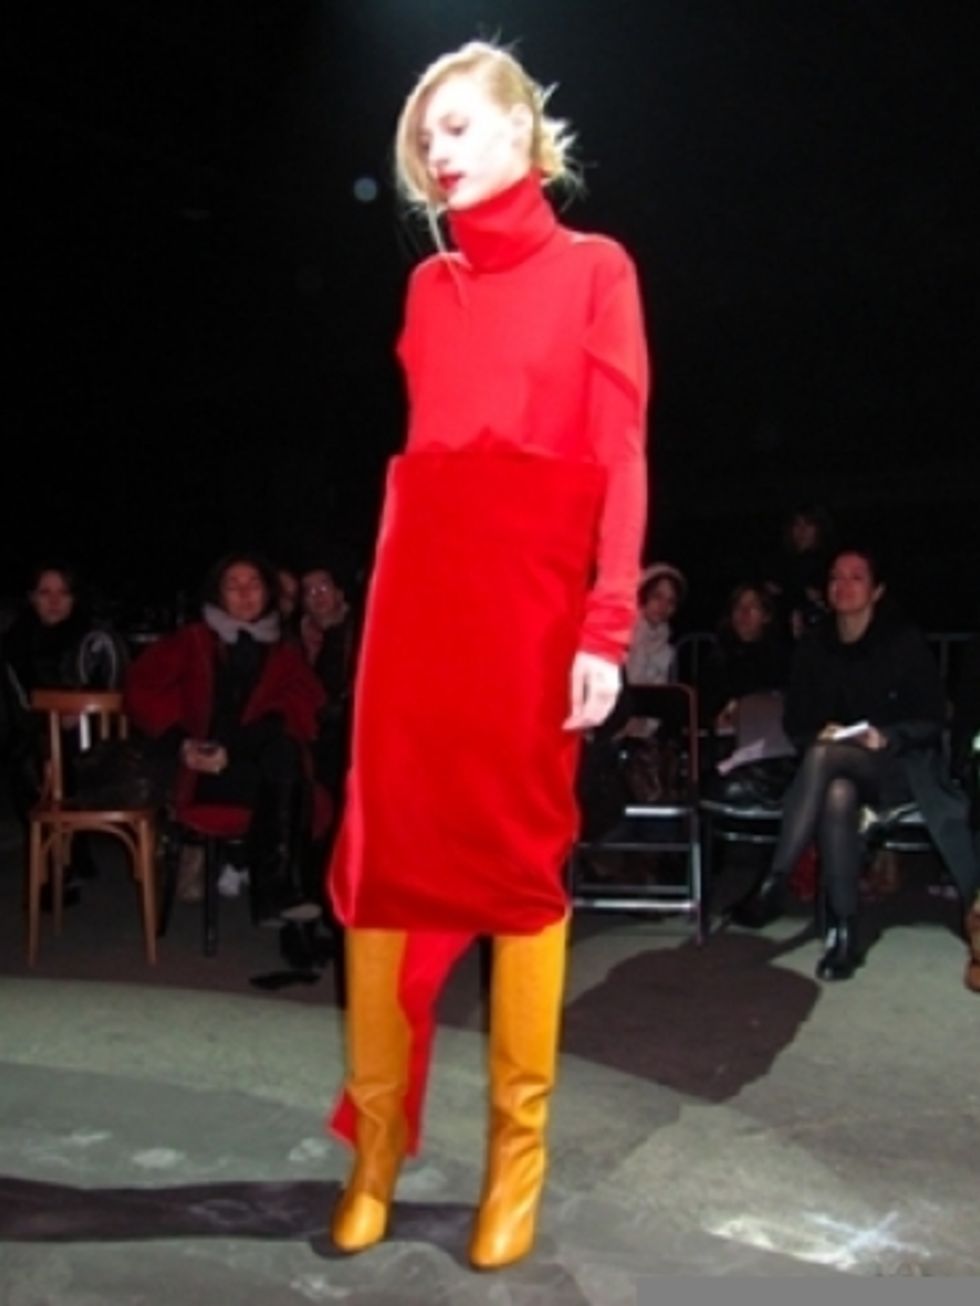 Footwear, Leg, Fashion show, Human body, Event, Shoulder, Joint, Outerwear, Runway, Red, 